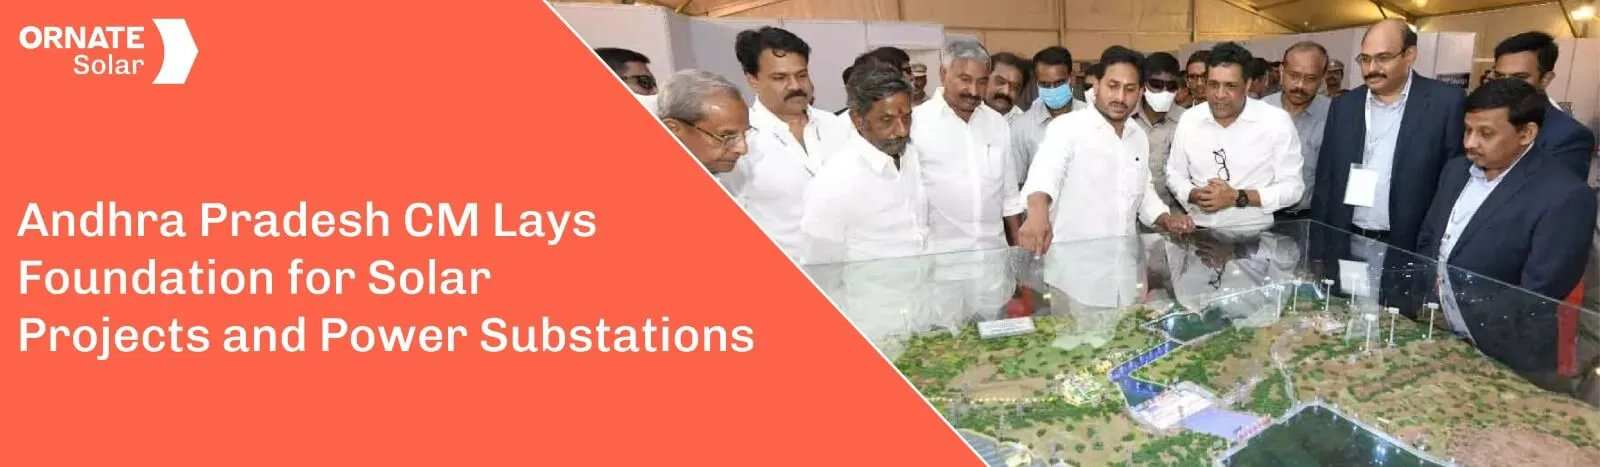 Please make news banner: Andhra Pradesh CM Lays Foundation for Solar Projects and Power Substations